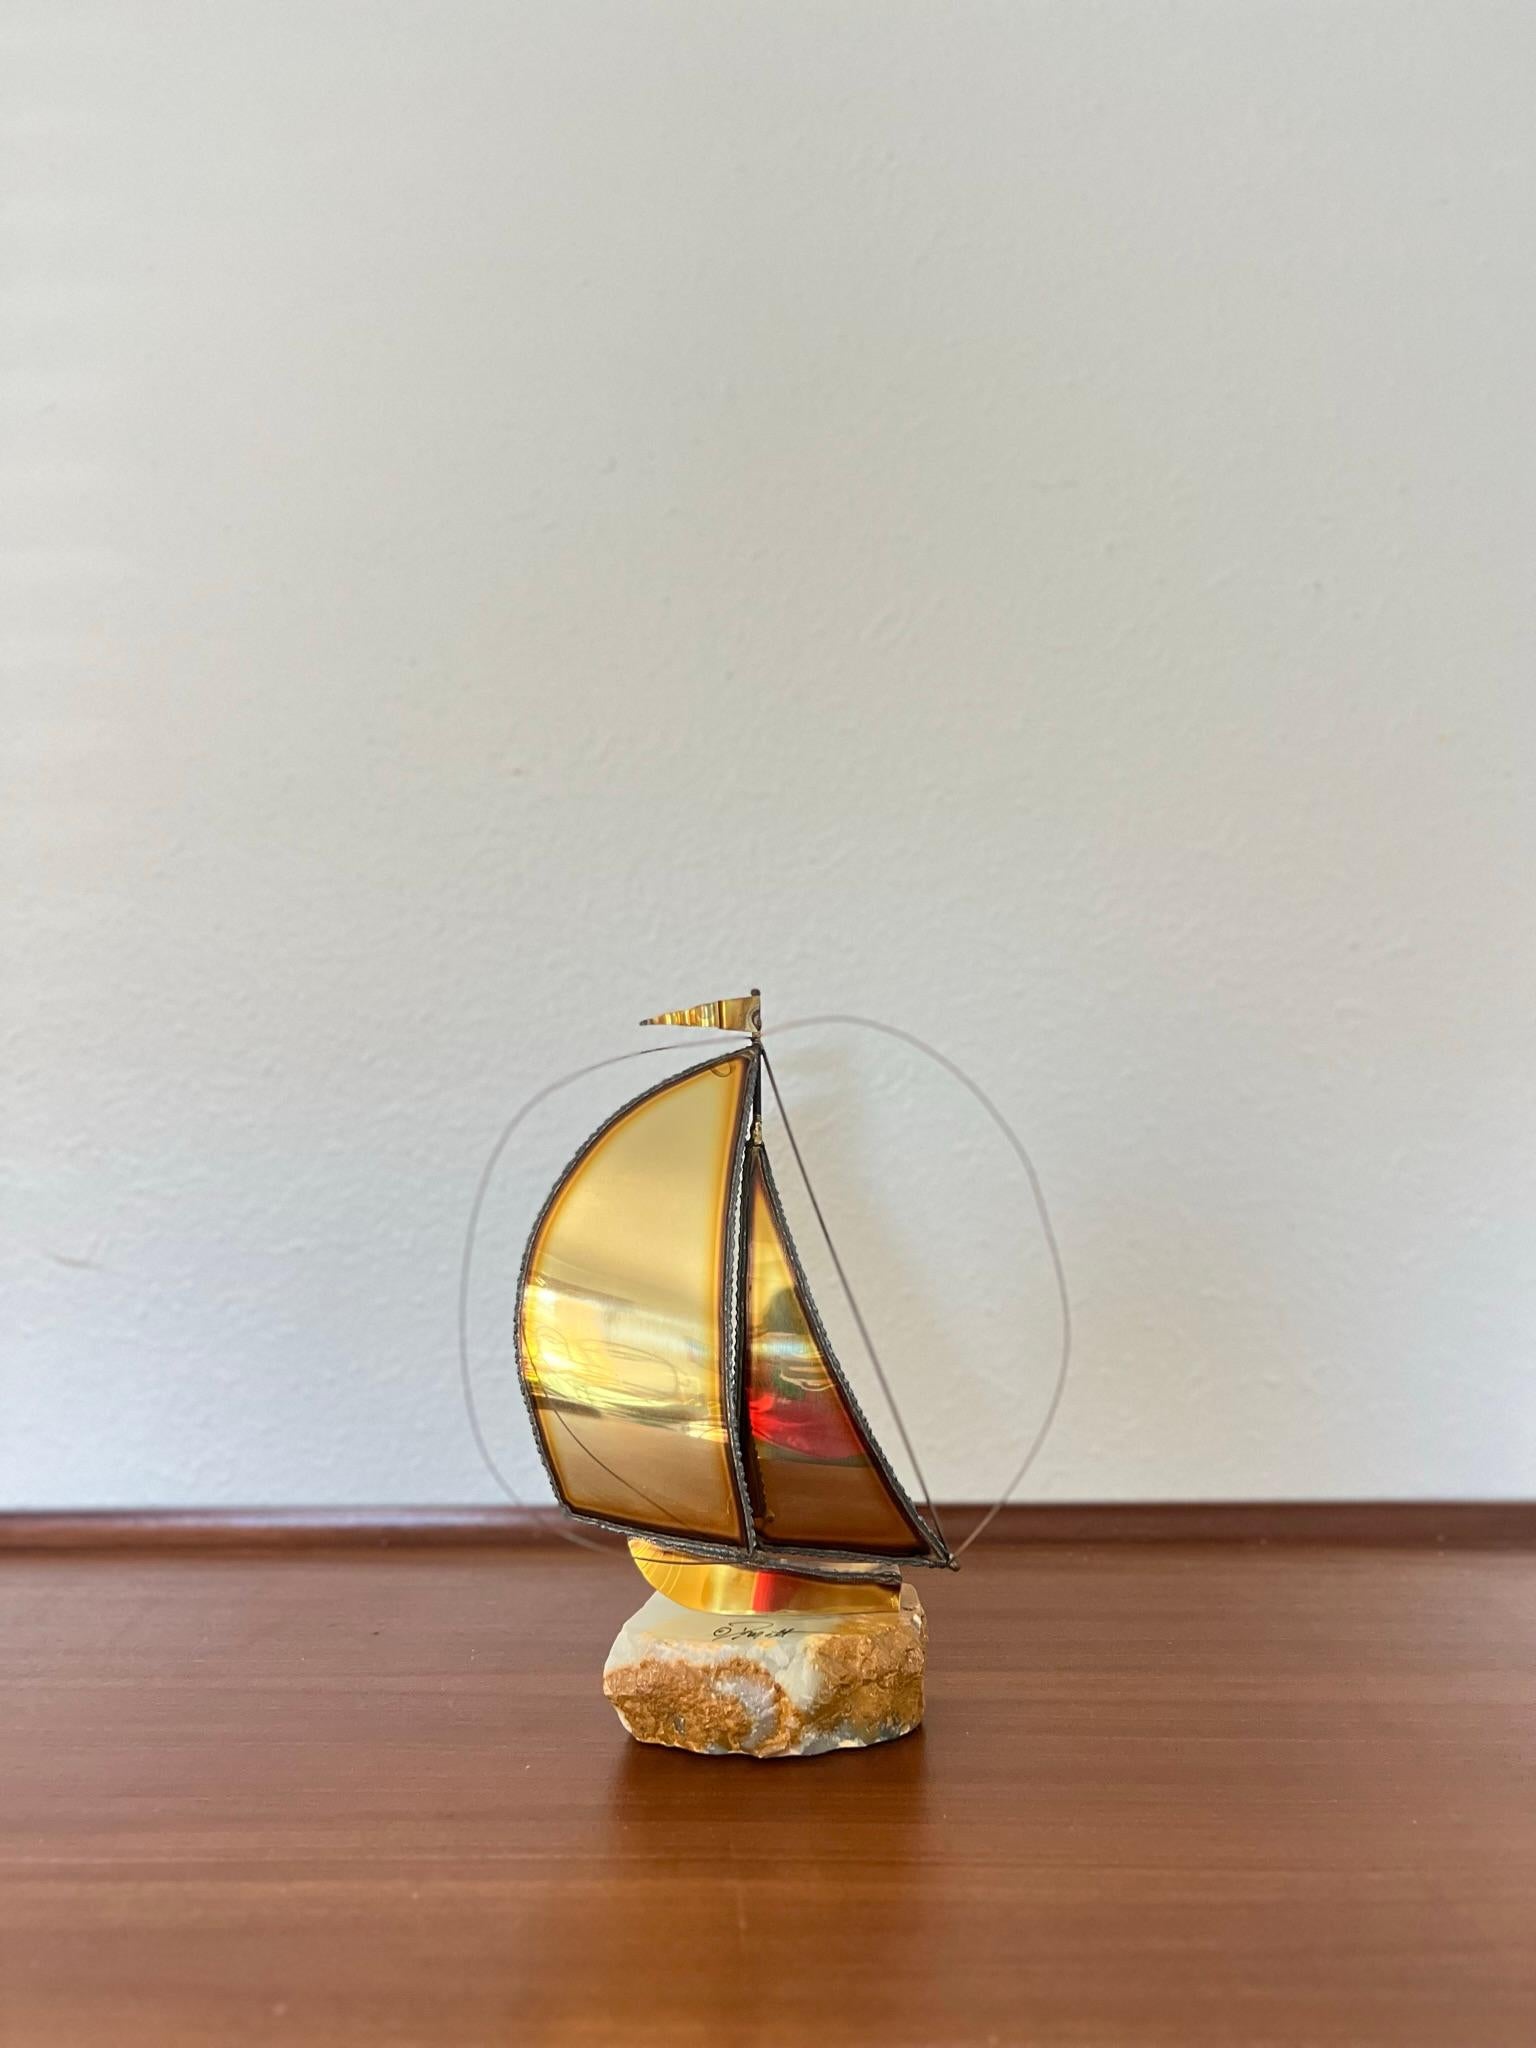 Mid-20th Century Vintage Mid-Century Modern Onyx and Brass Sailboat, Signed by Artist For Sale